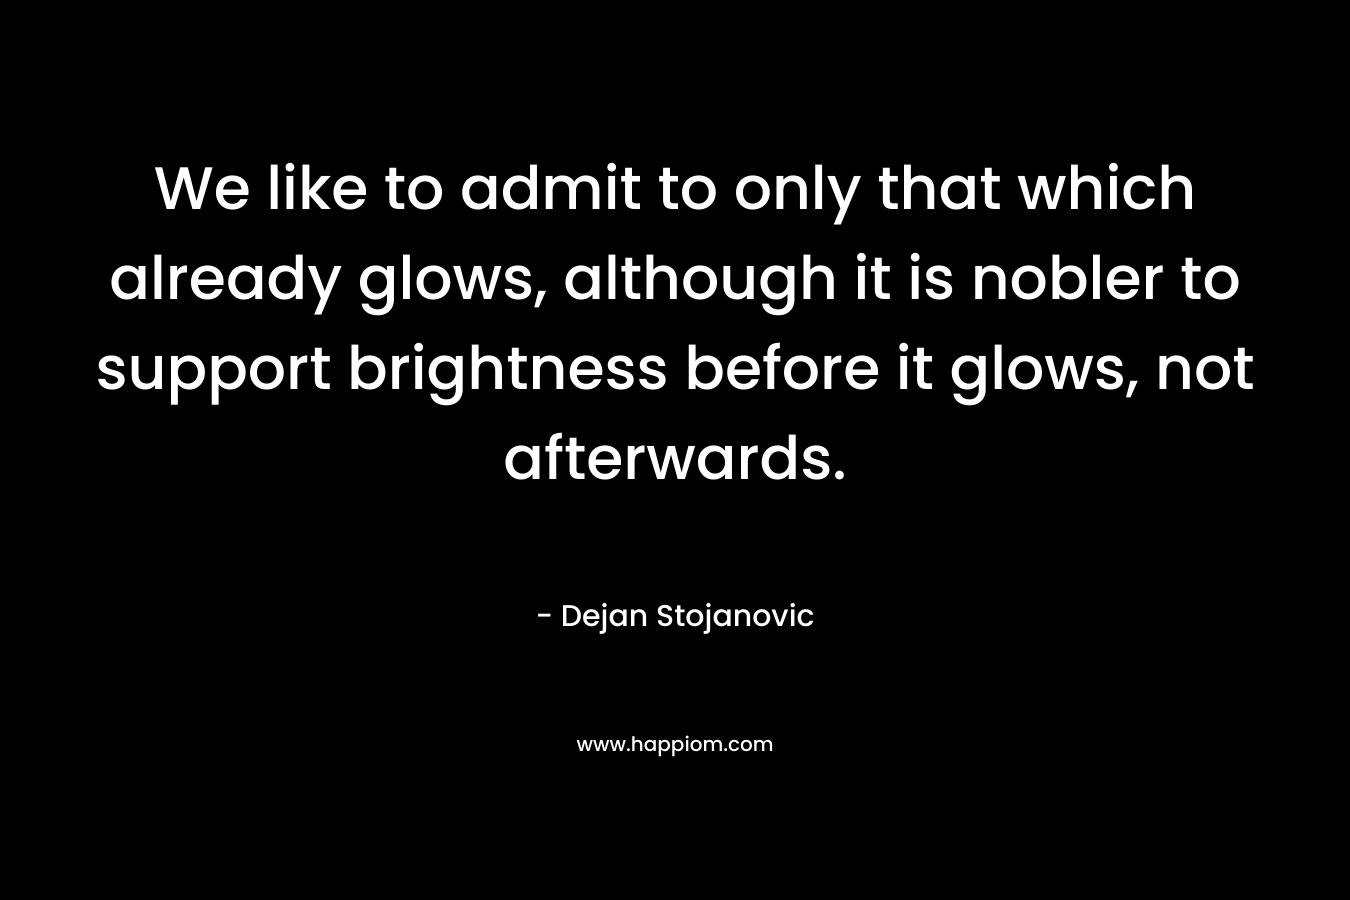 We like to admit to only that which already glows, although it is nobler to support brightness before it glows, not afterwards.